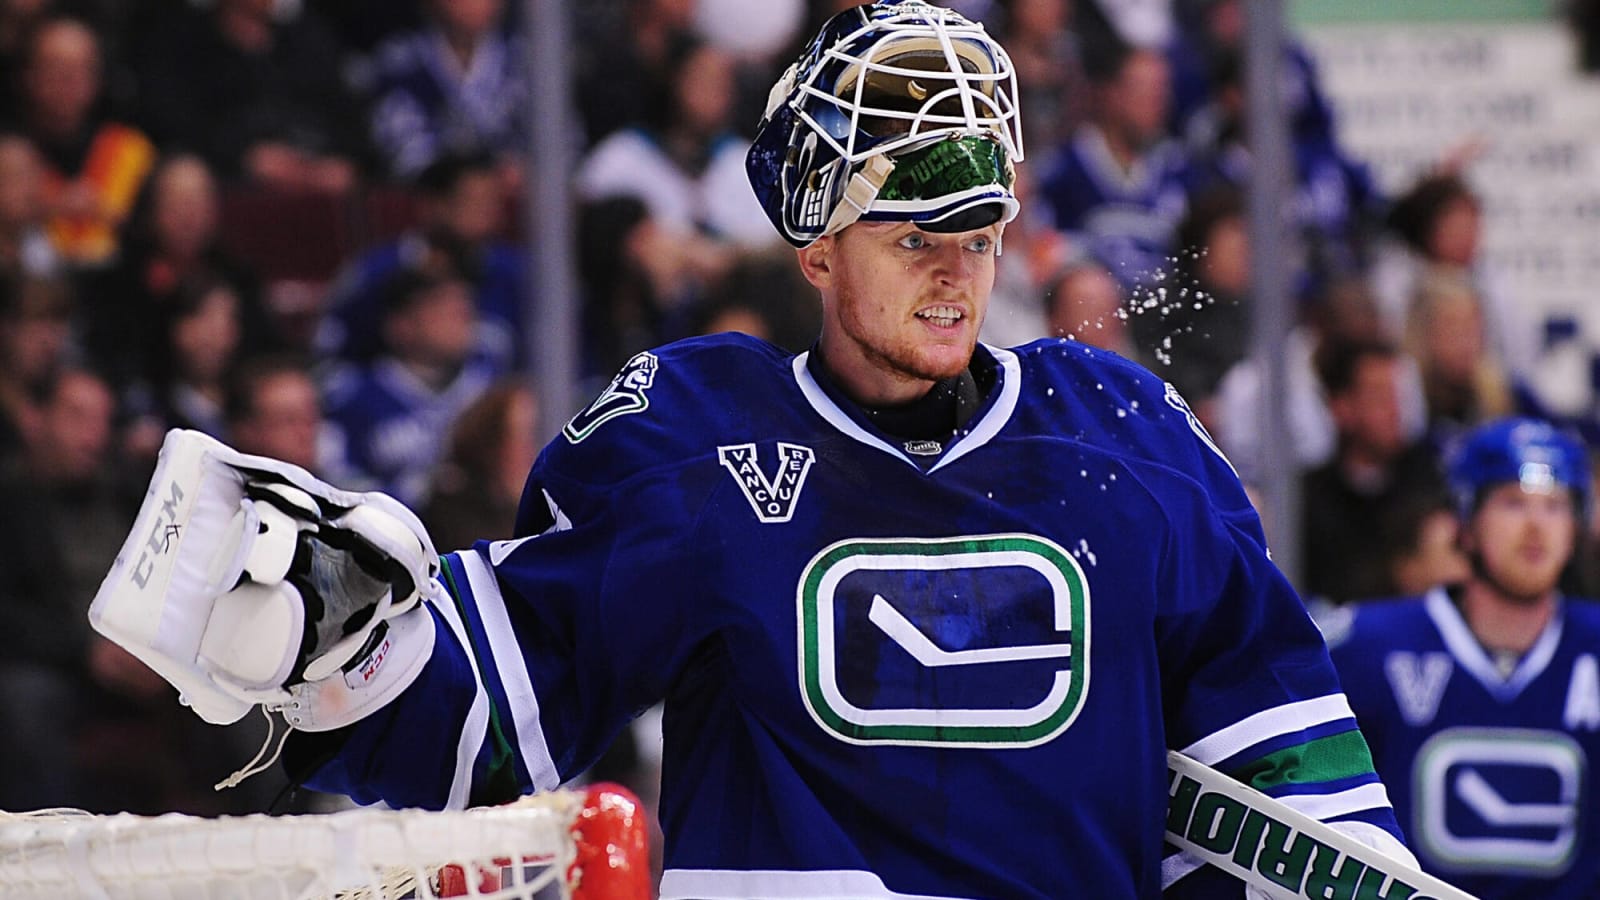 Cory Schneider talks Canucks’ playoff chances, hating the Bruins, and more